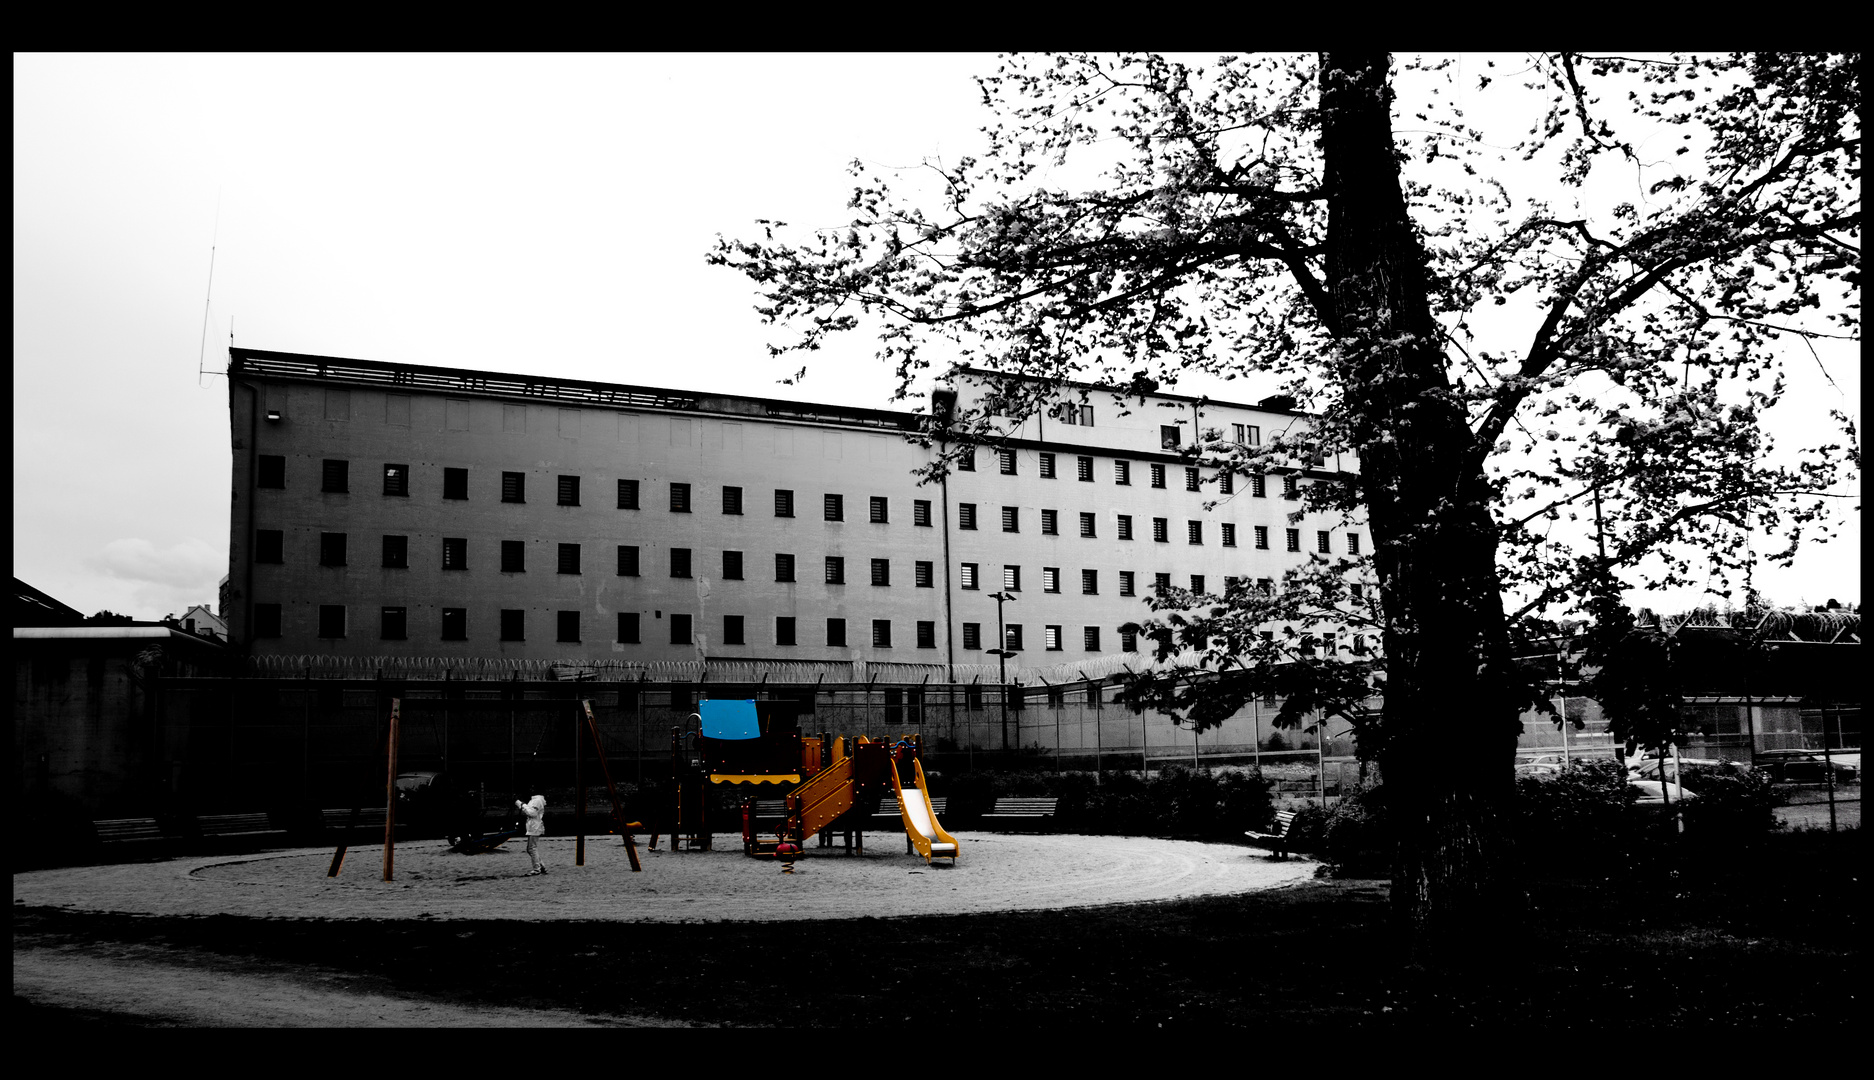 Come out and play (Oslo Jail)